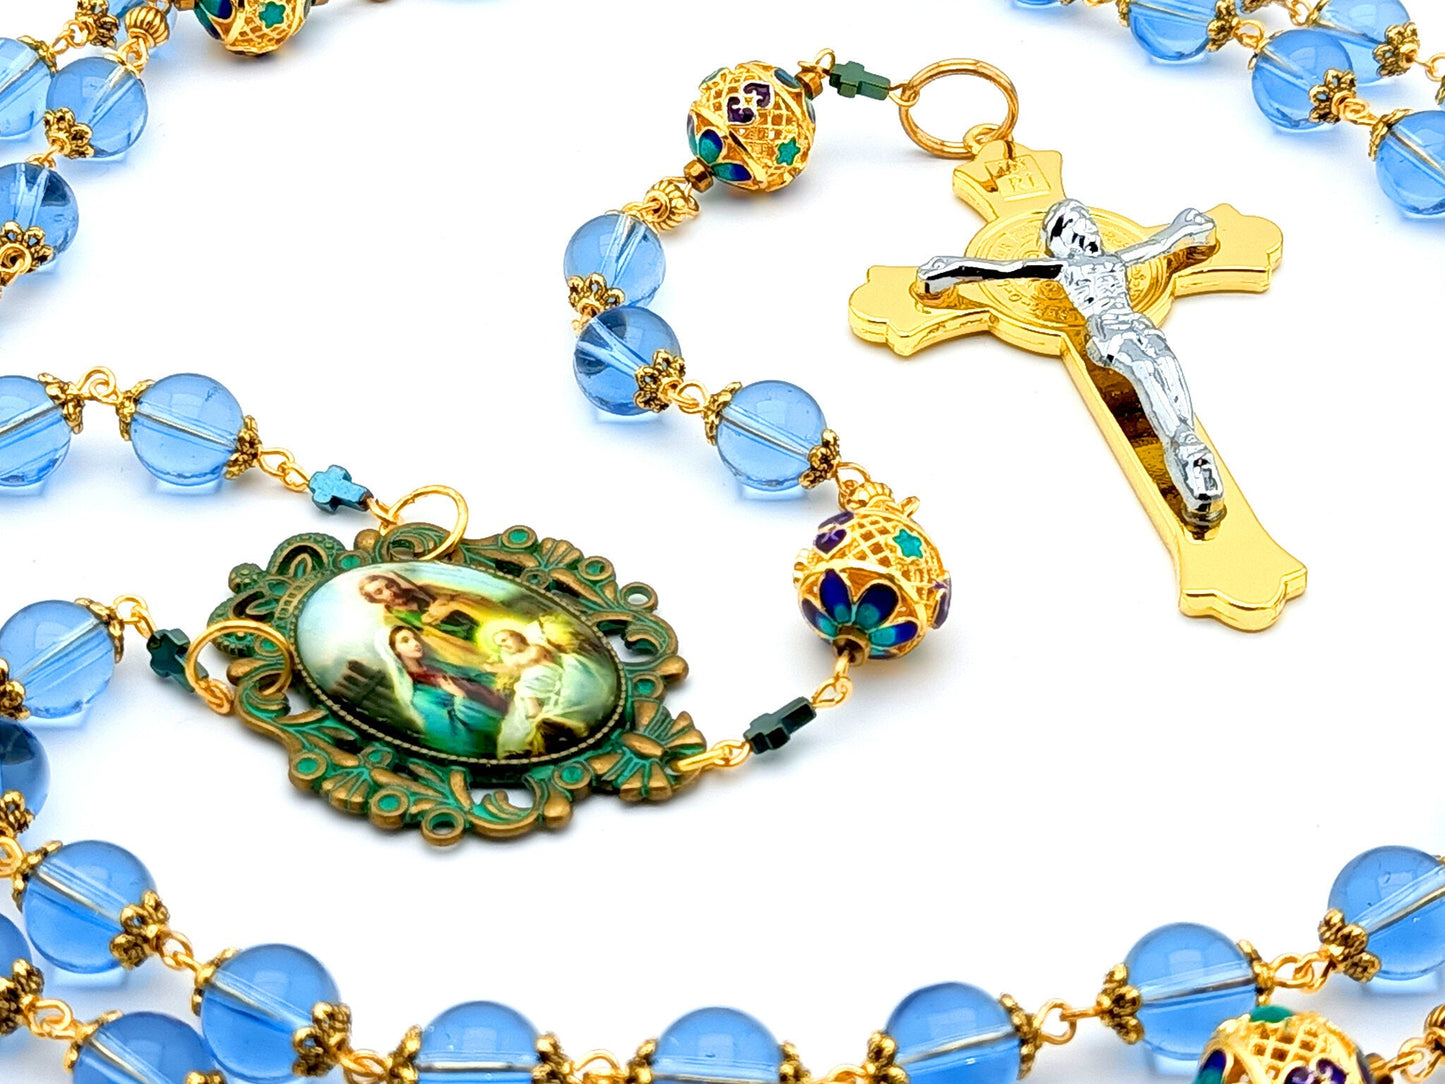 Holy Family unique rosary beads with blue glass and filigree gold beads, golden Saint Benedict crucifix and aged verdigris picture centre medal.